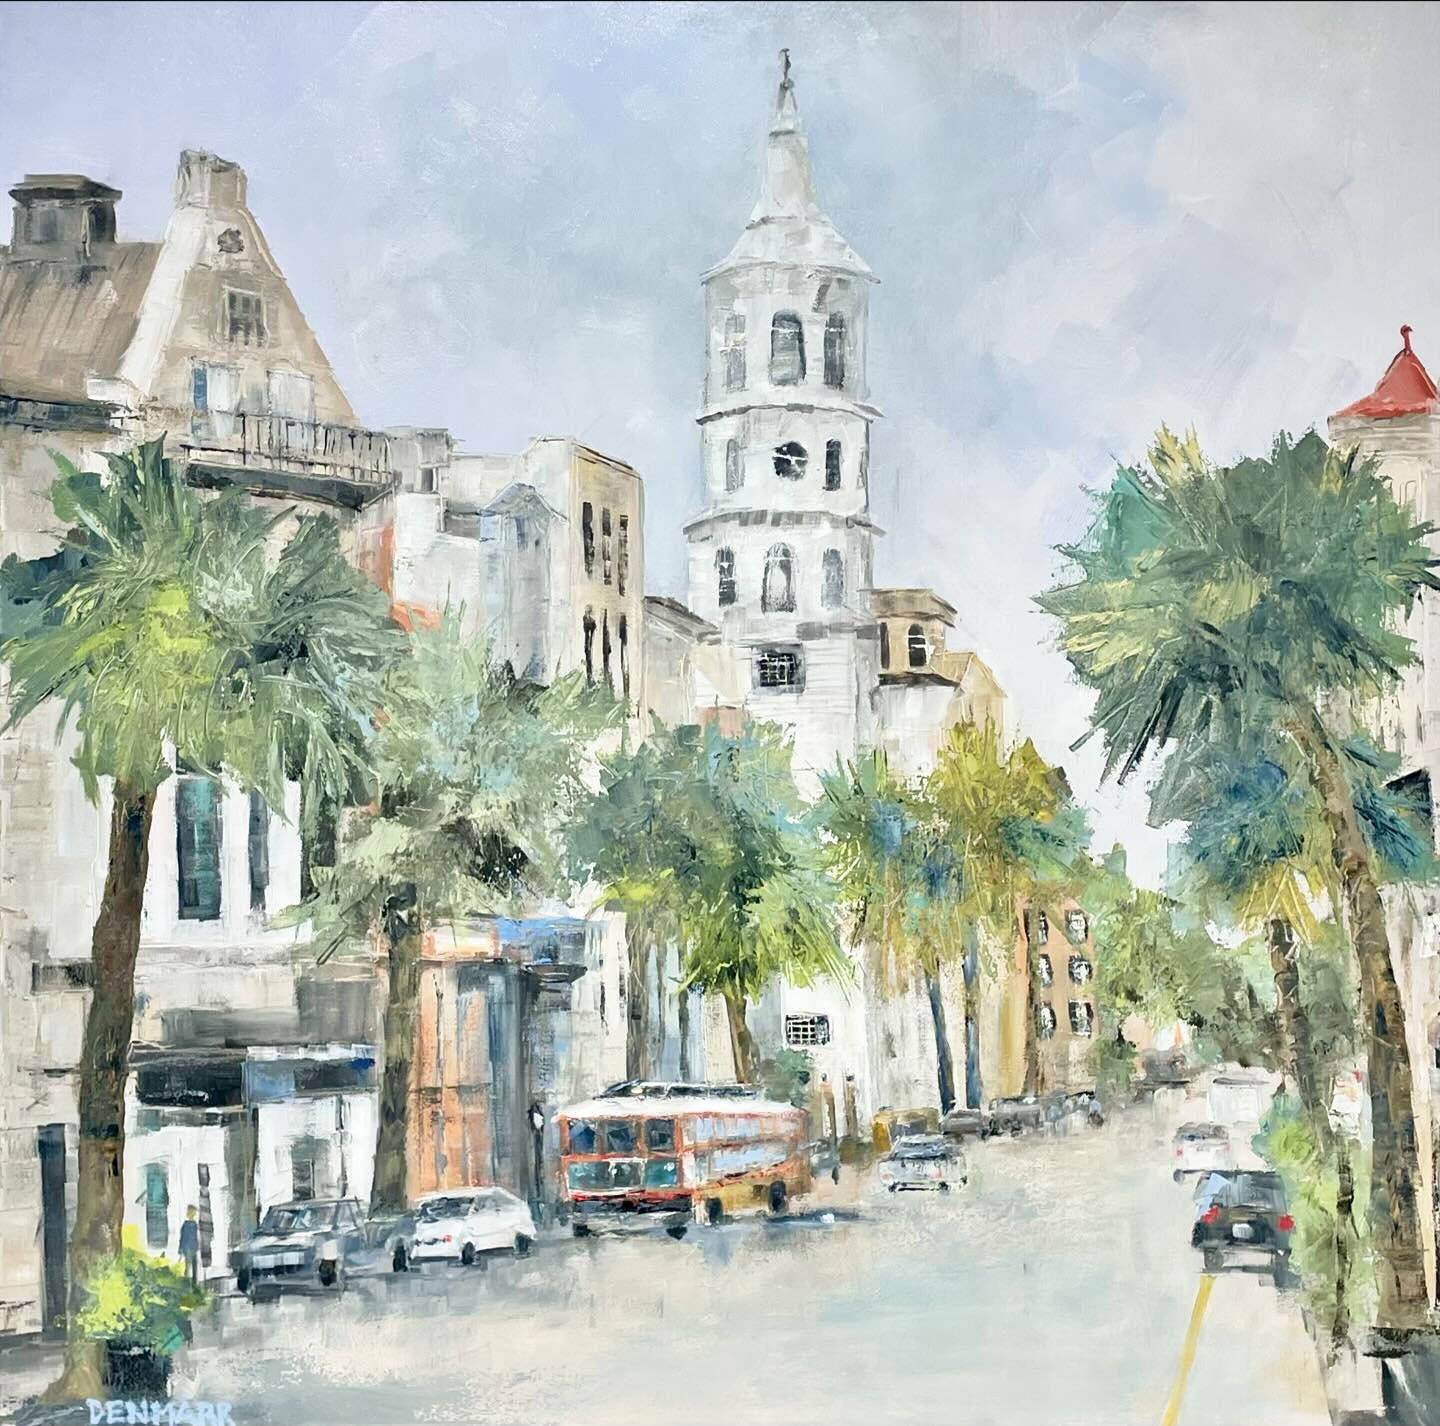 Fresh off the easel&mdash;&ldquo;Charleston On My Mind&rdquo; by local artist, @becky.denmark just arrived! Oil on canvas, 30x30. Absolutely stunning painting! #heritageclt #curateddecor #europeanantiques #italianantiques #englishantiques #frenchanti